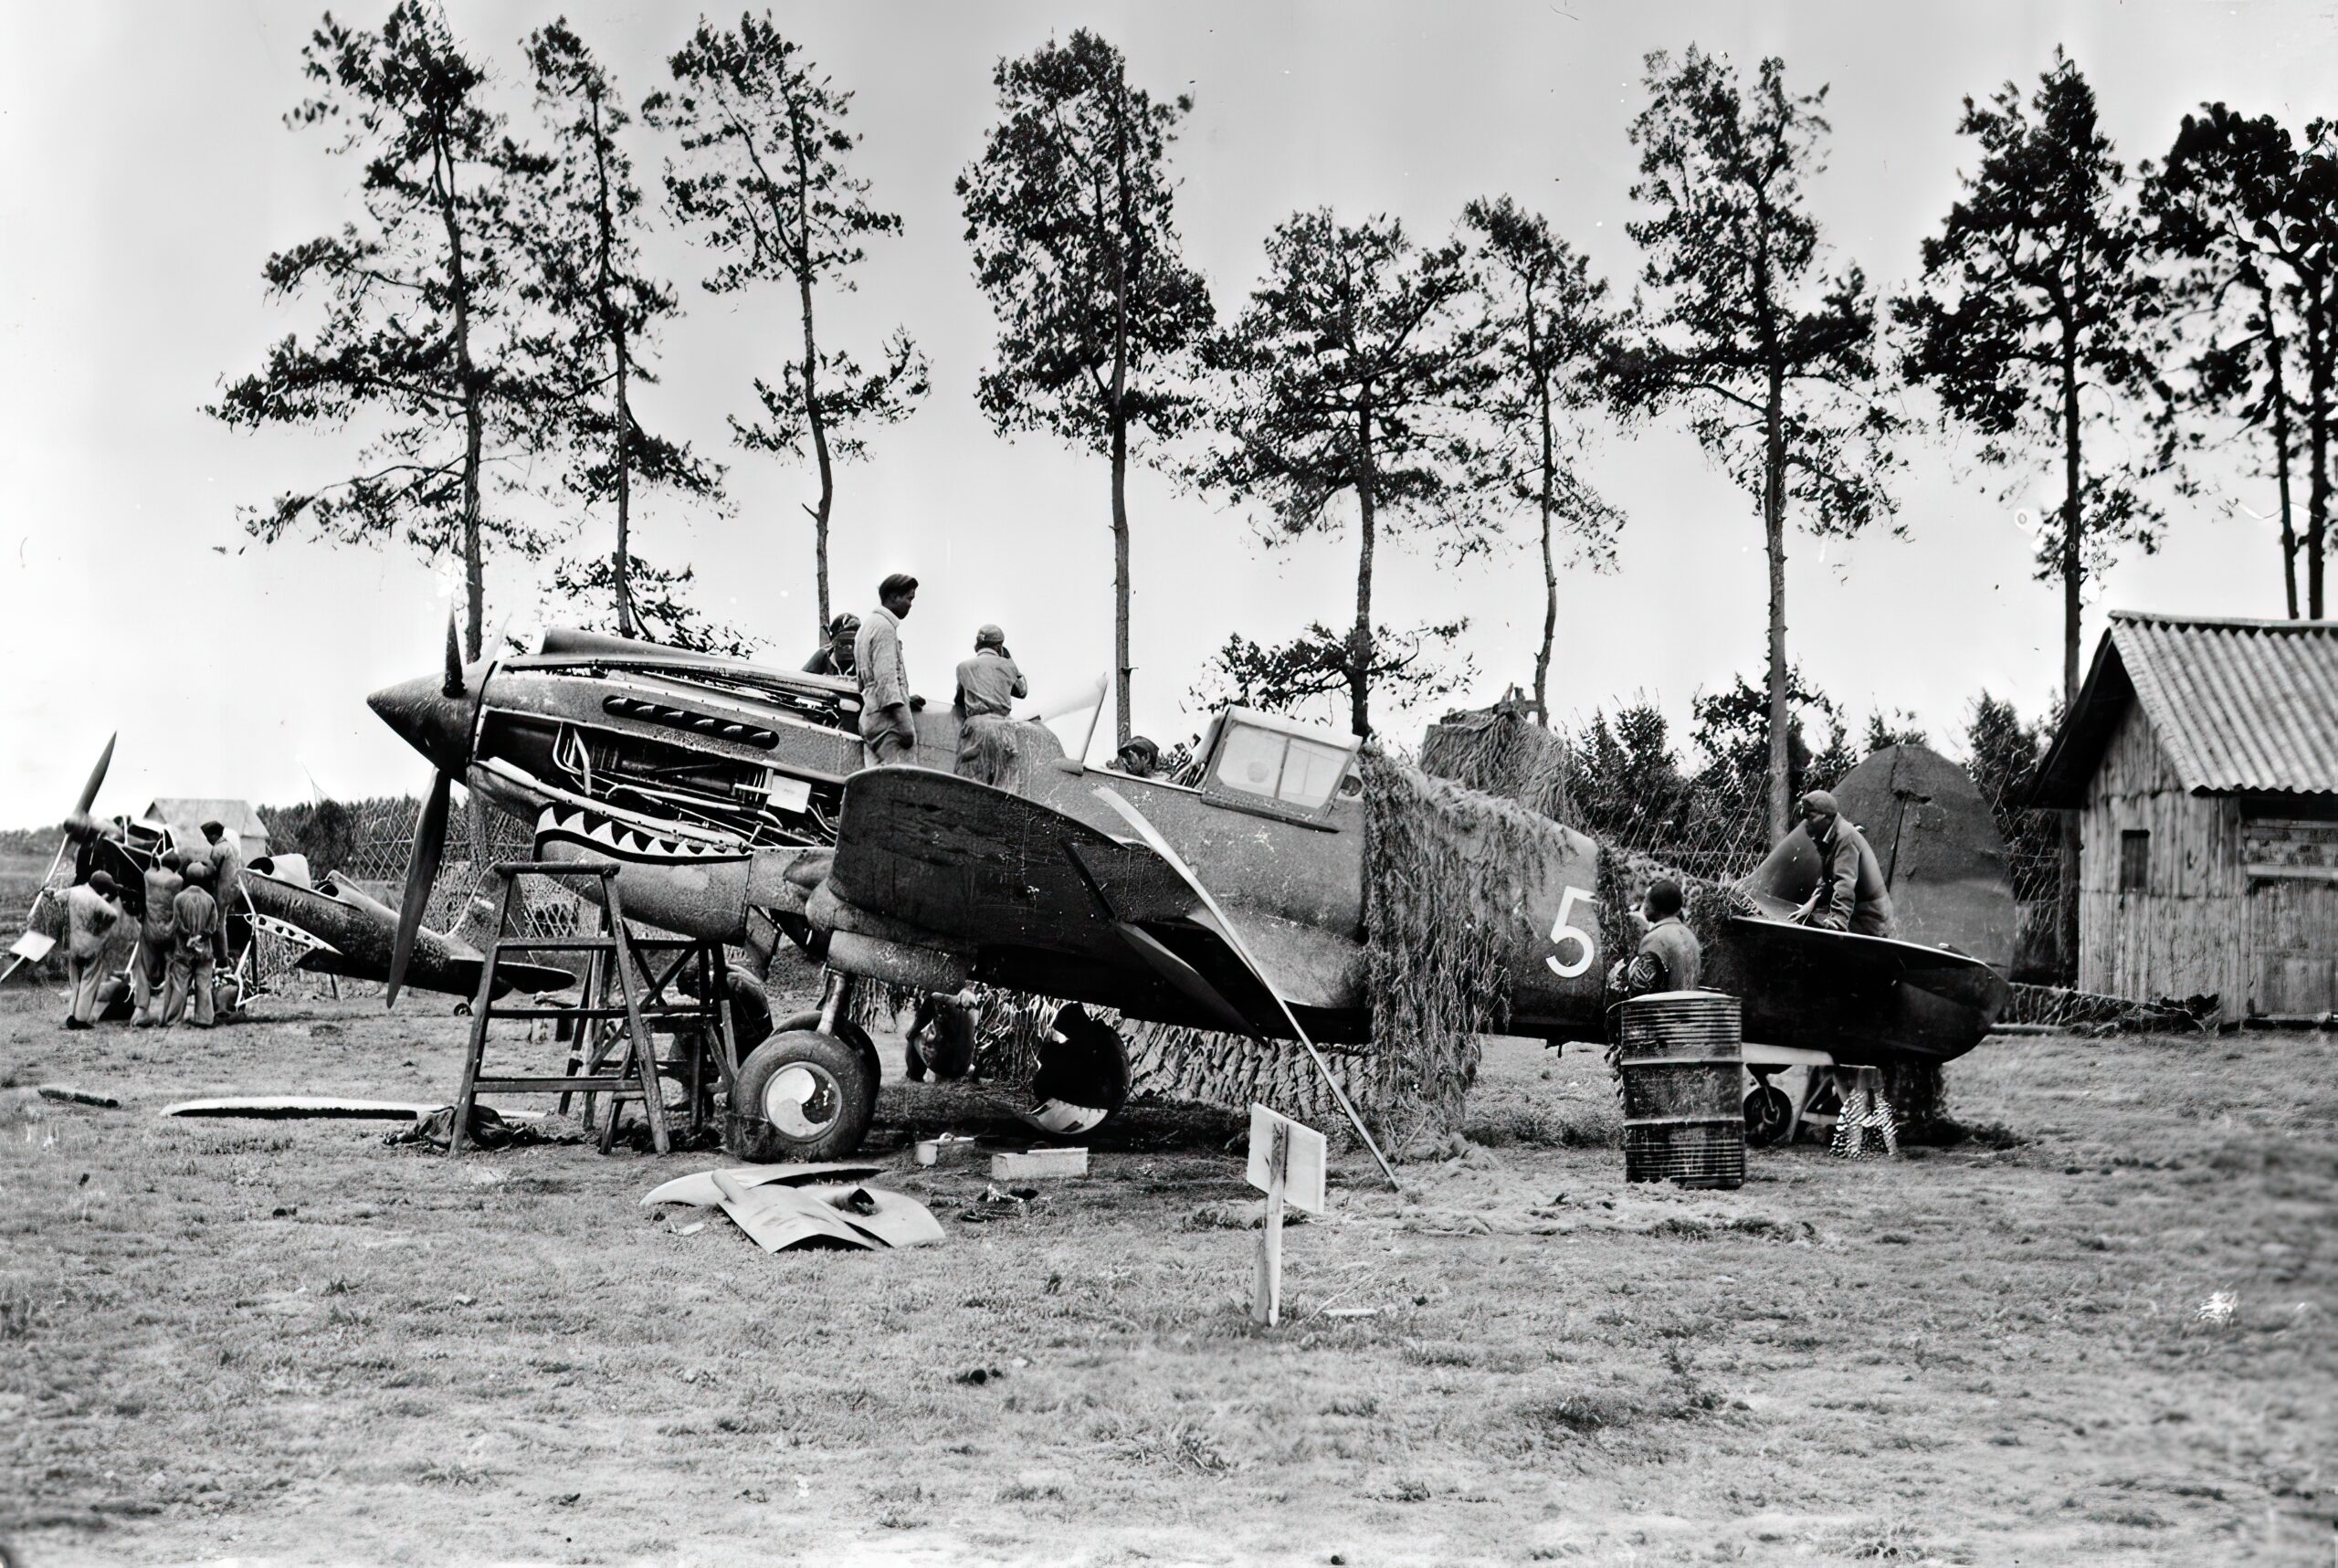 Maintenance on a Curtiss P-40 of the American Volunteer Group ("Flying Tigers") at Kunming, China, circa 1941